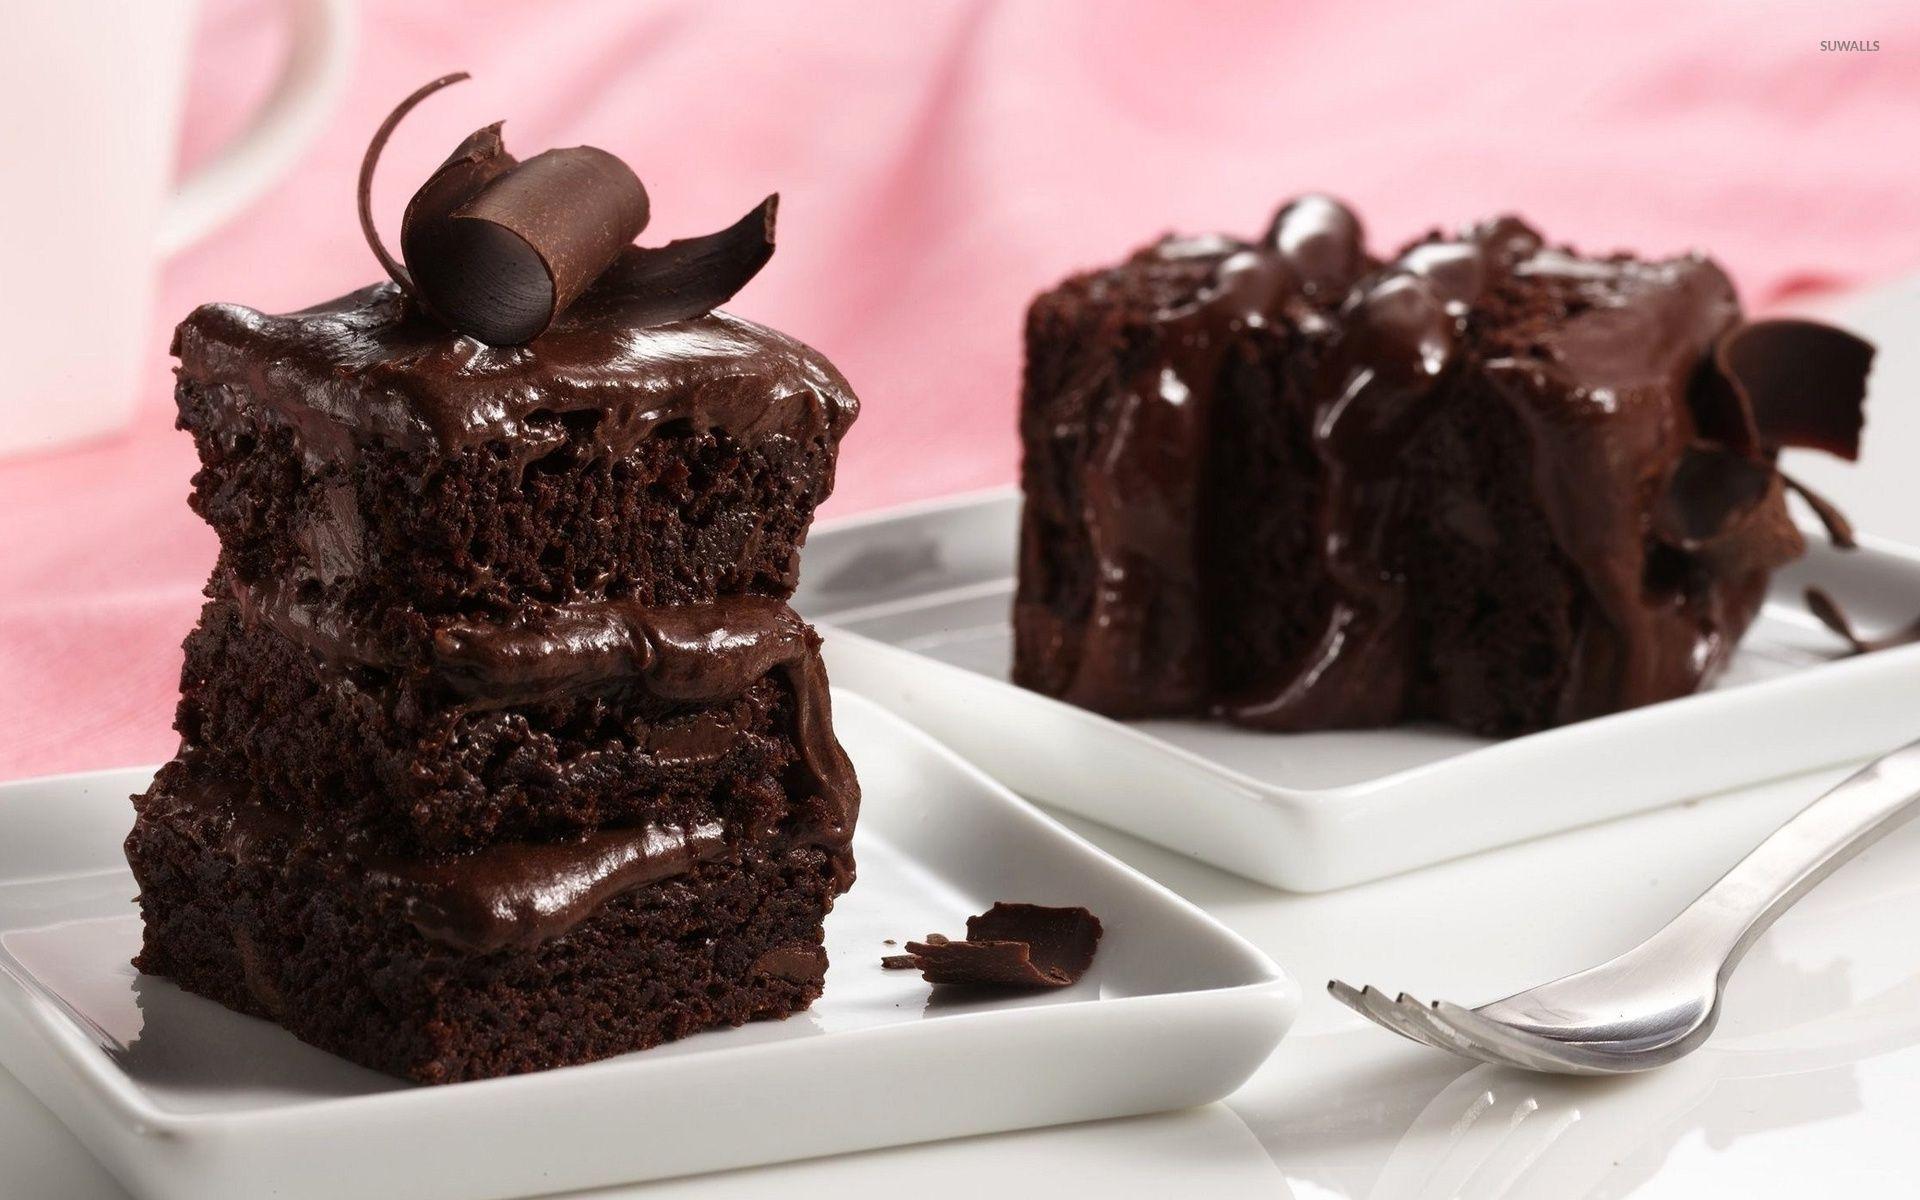 Chocolate Cake Photos Download The BEST Free Chocolate Cake Stock Photos   HD Images